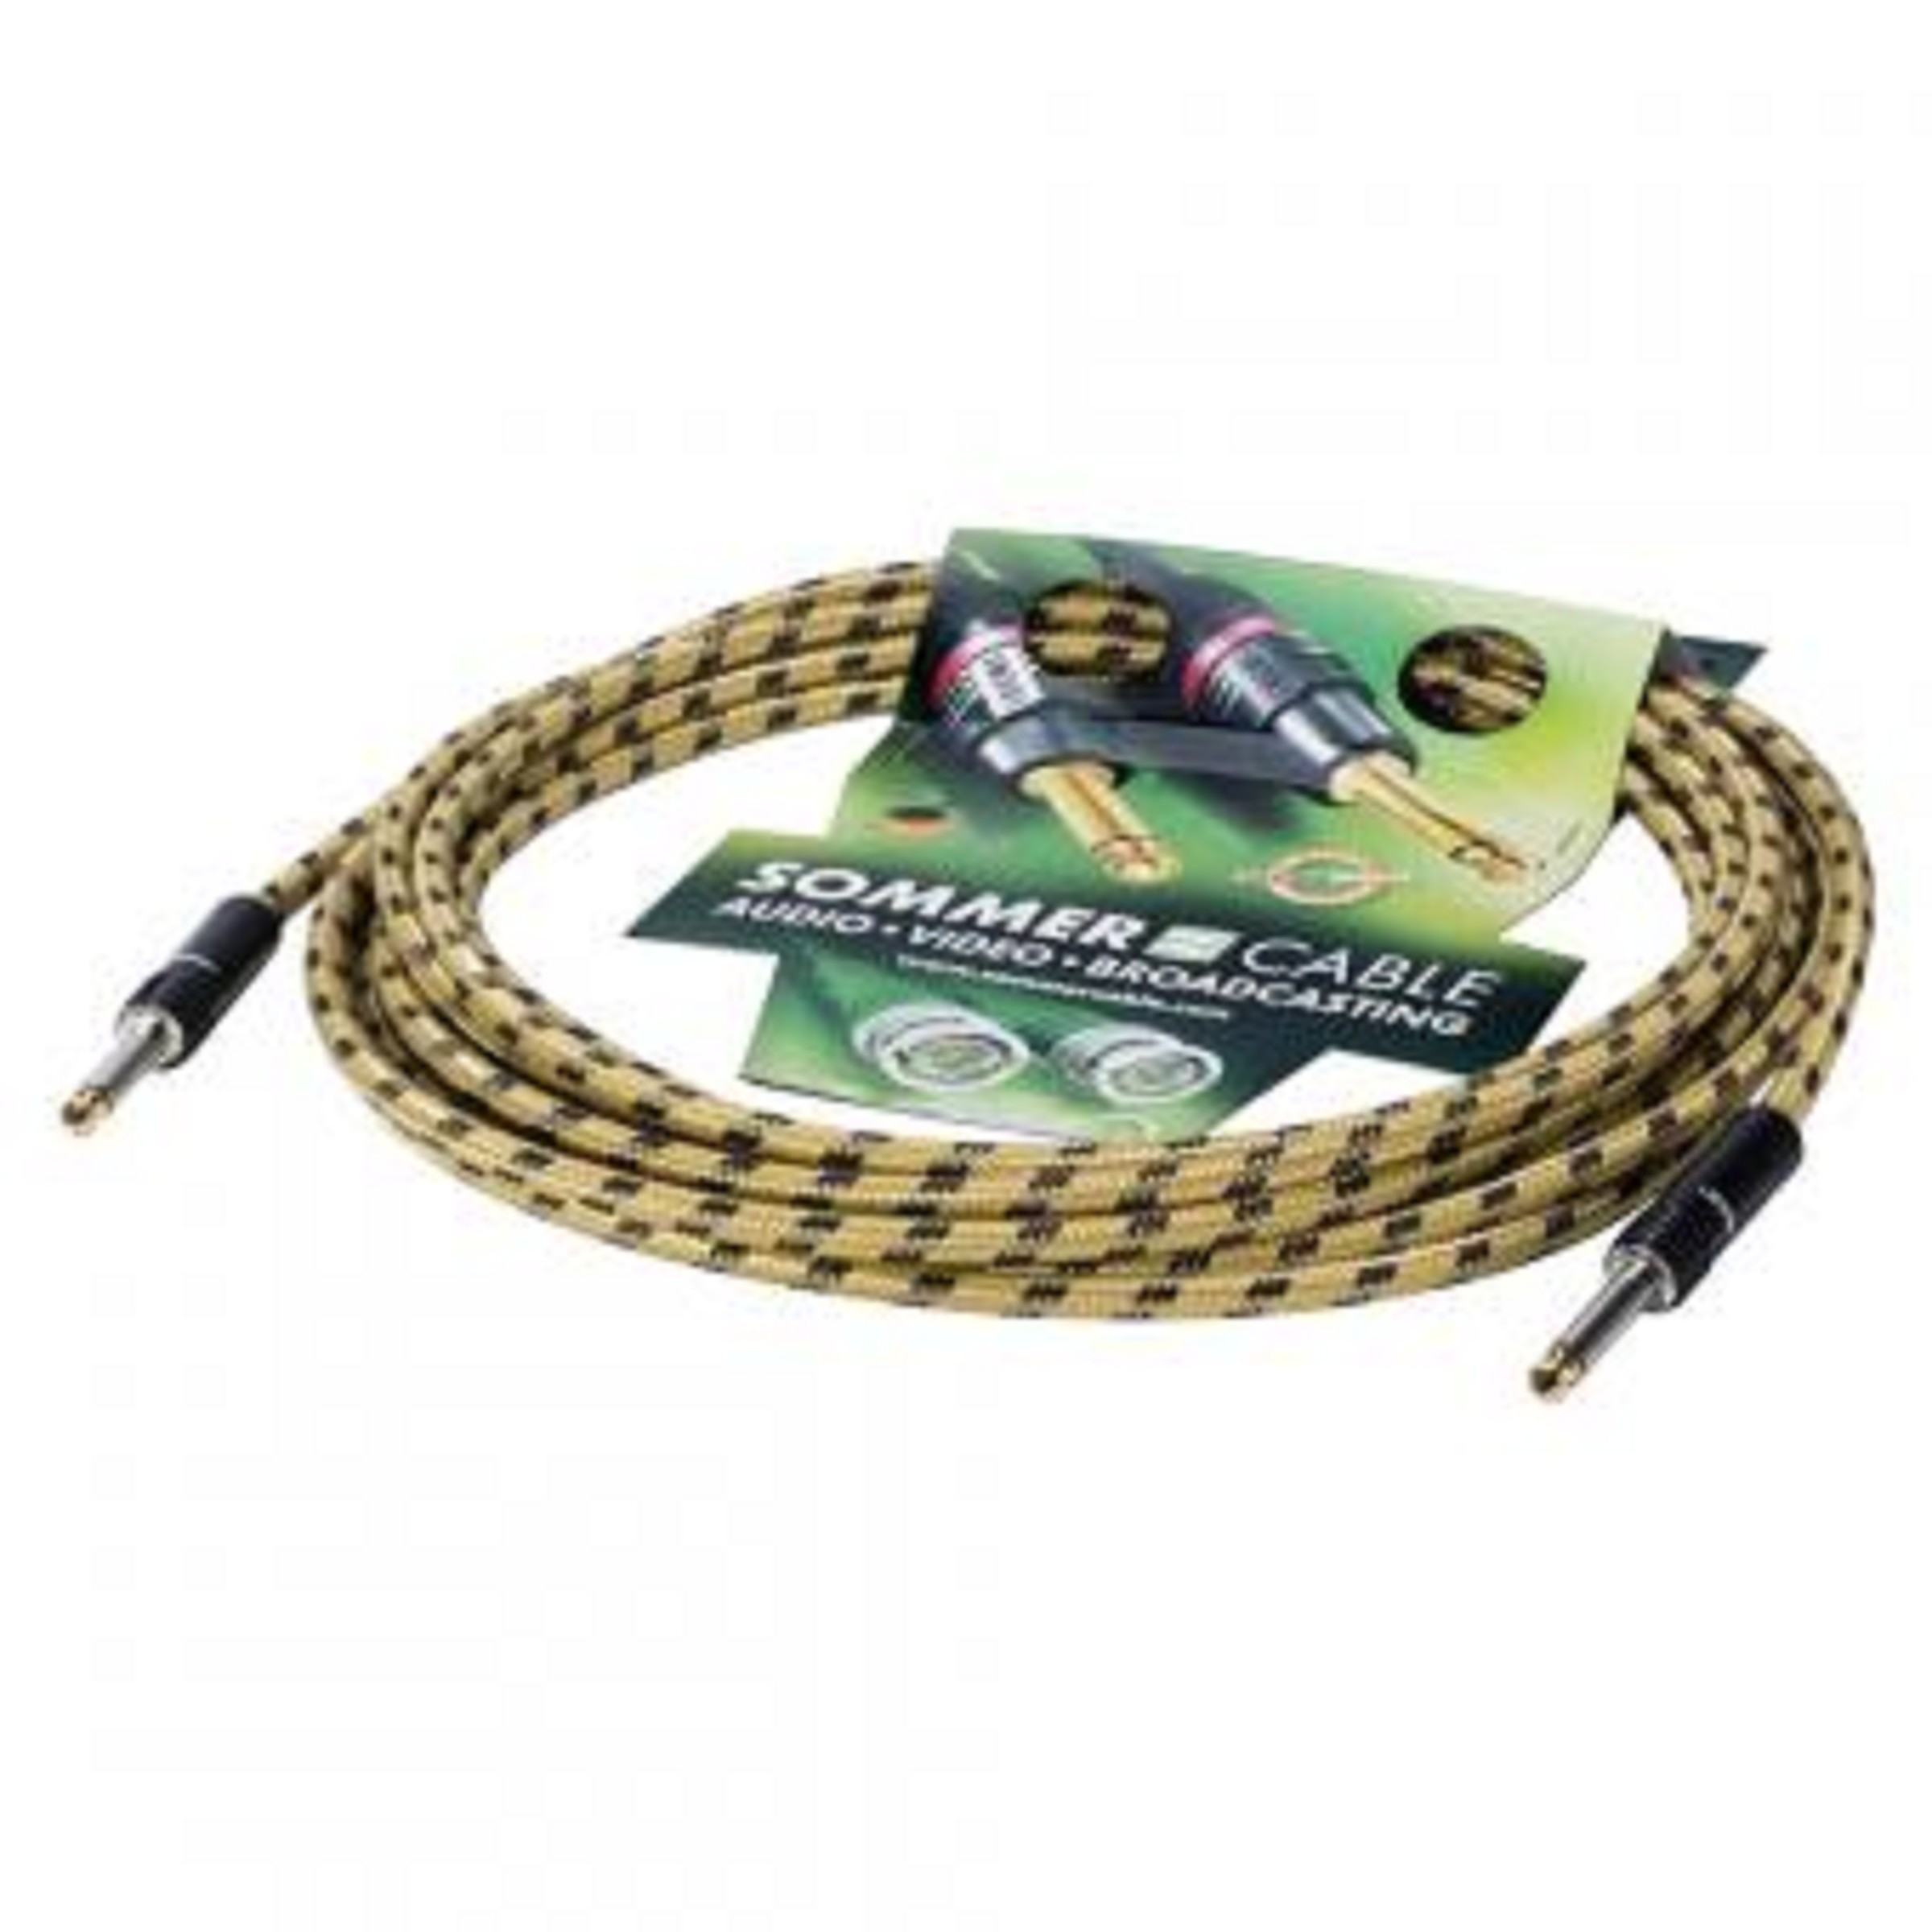 Sommer Cable CQ19 Monkl  Monkl 6,0m gelb